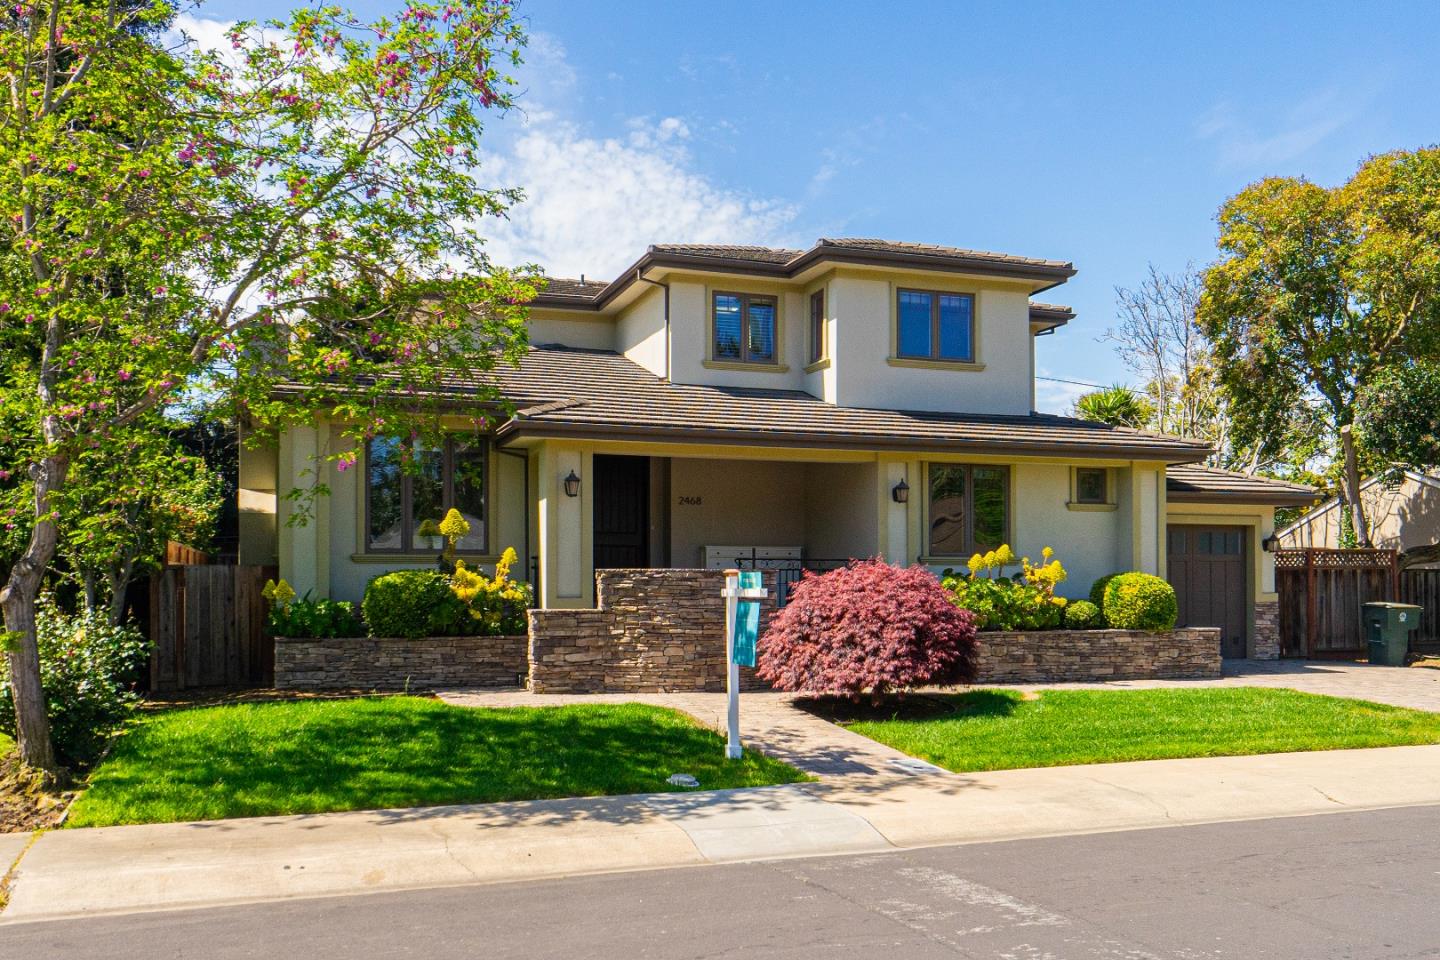 Photo of 2468 Chabot Ter in Palo Alto, CA